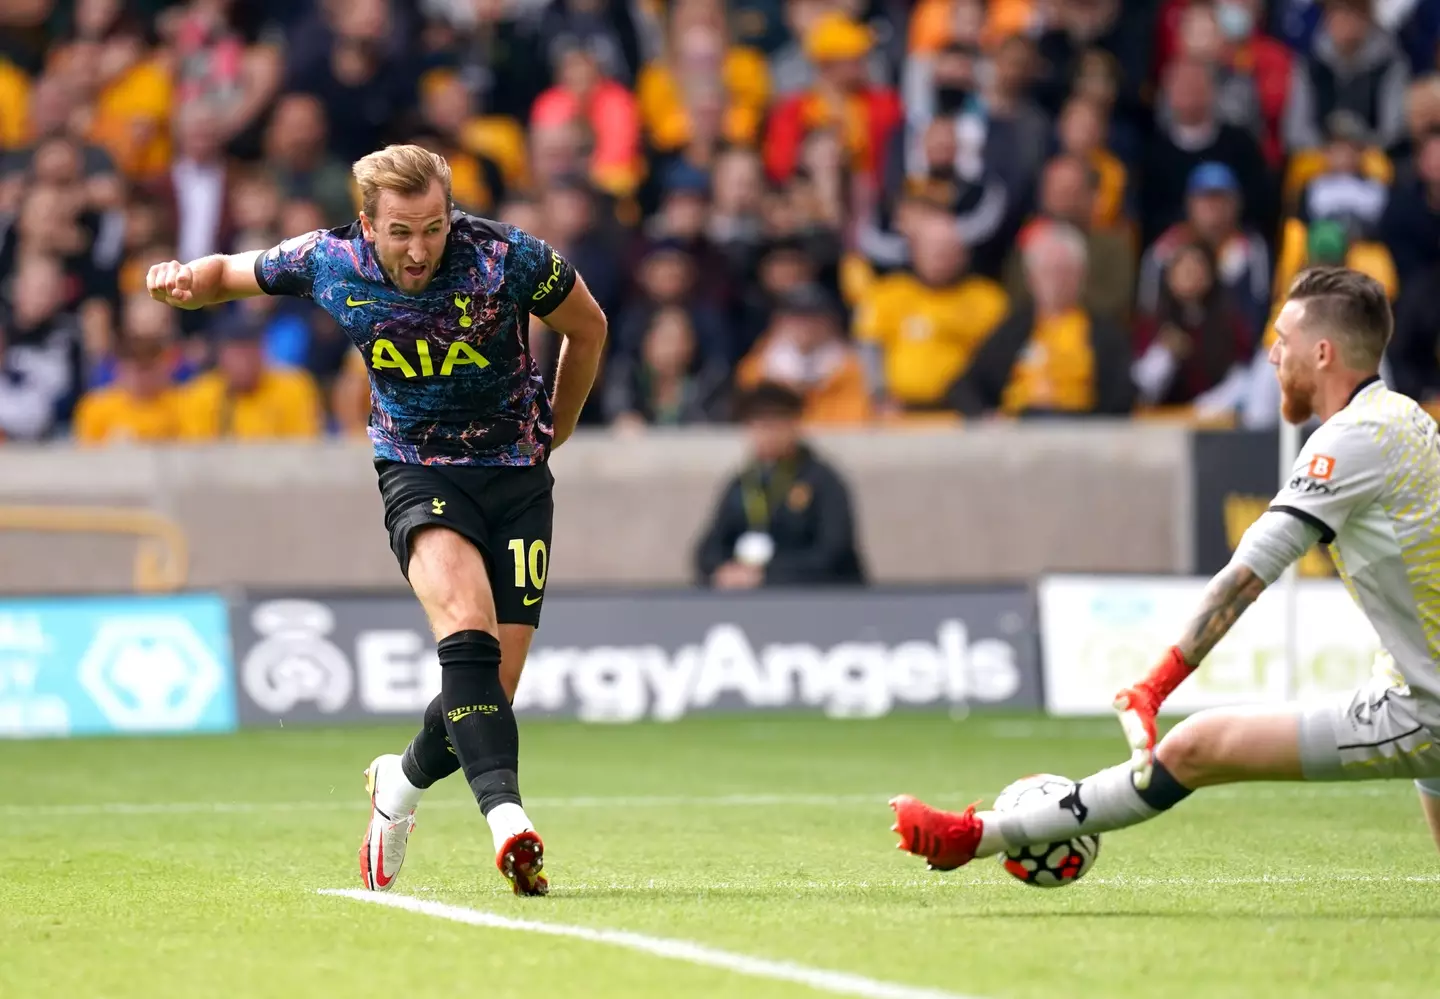 Harry Kane revealed this week that he will be staying at Spurs this season